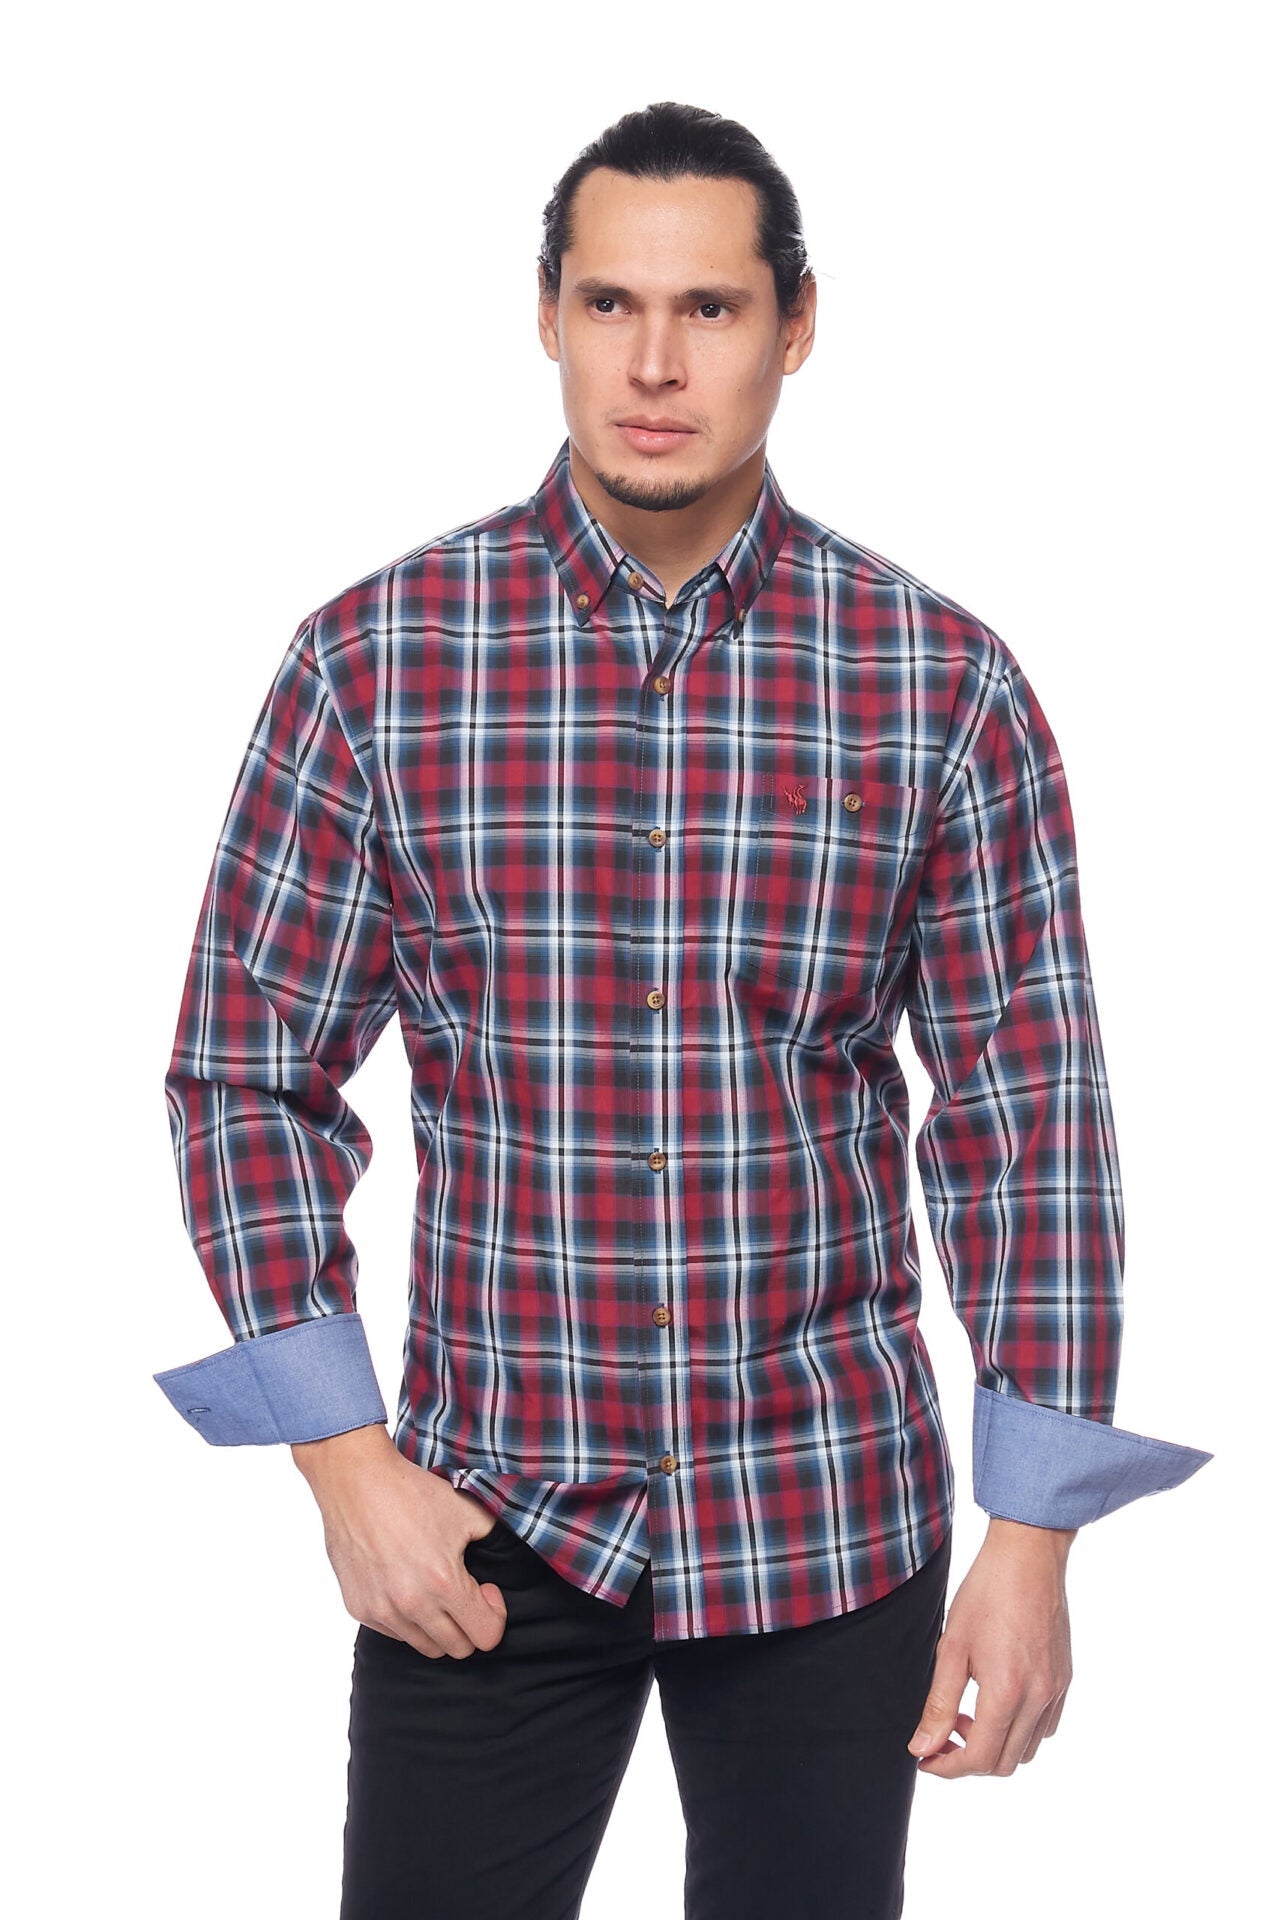 BUTTON-DOWN Men's Western Long Sleeve, 100% Cotton Plaid Shirts With Snap ButtonsS – With Logo